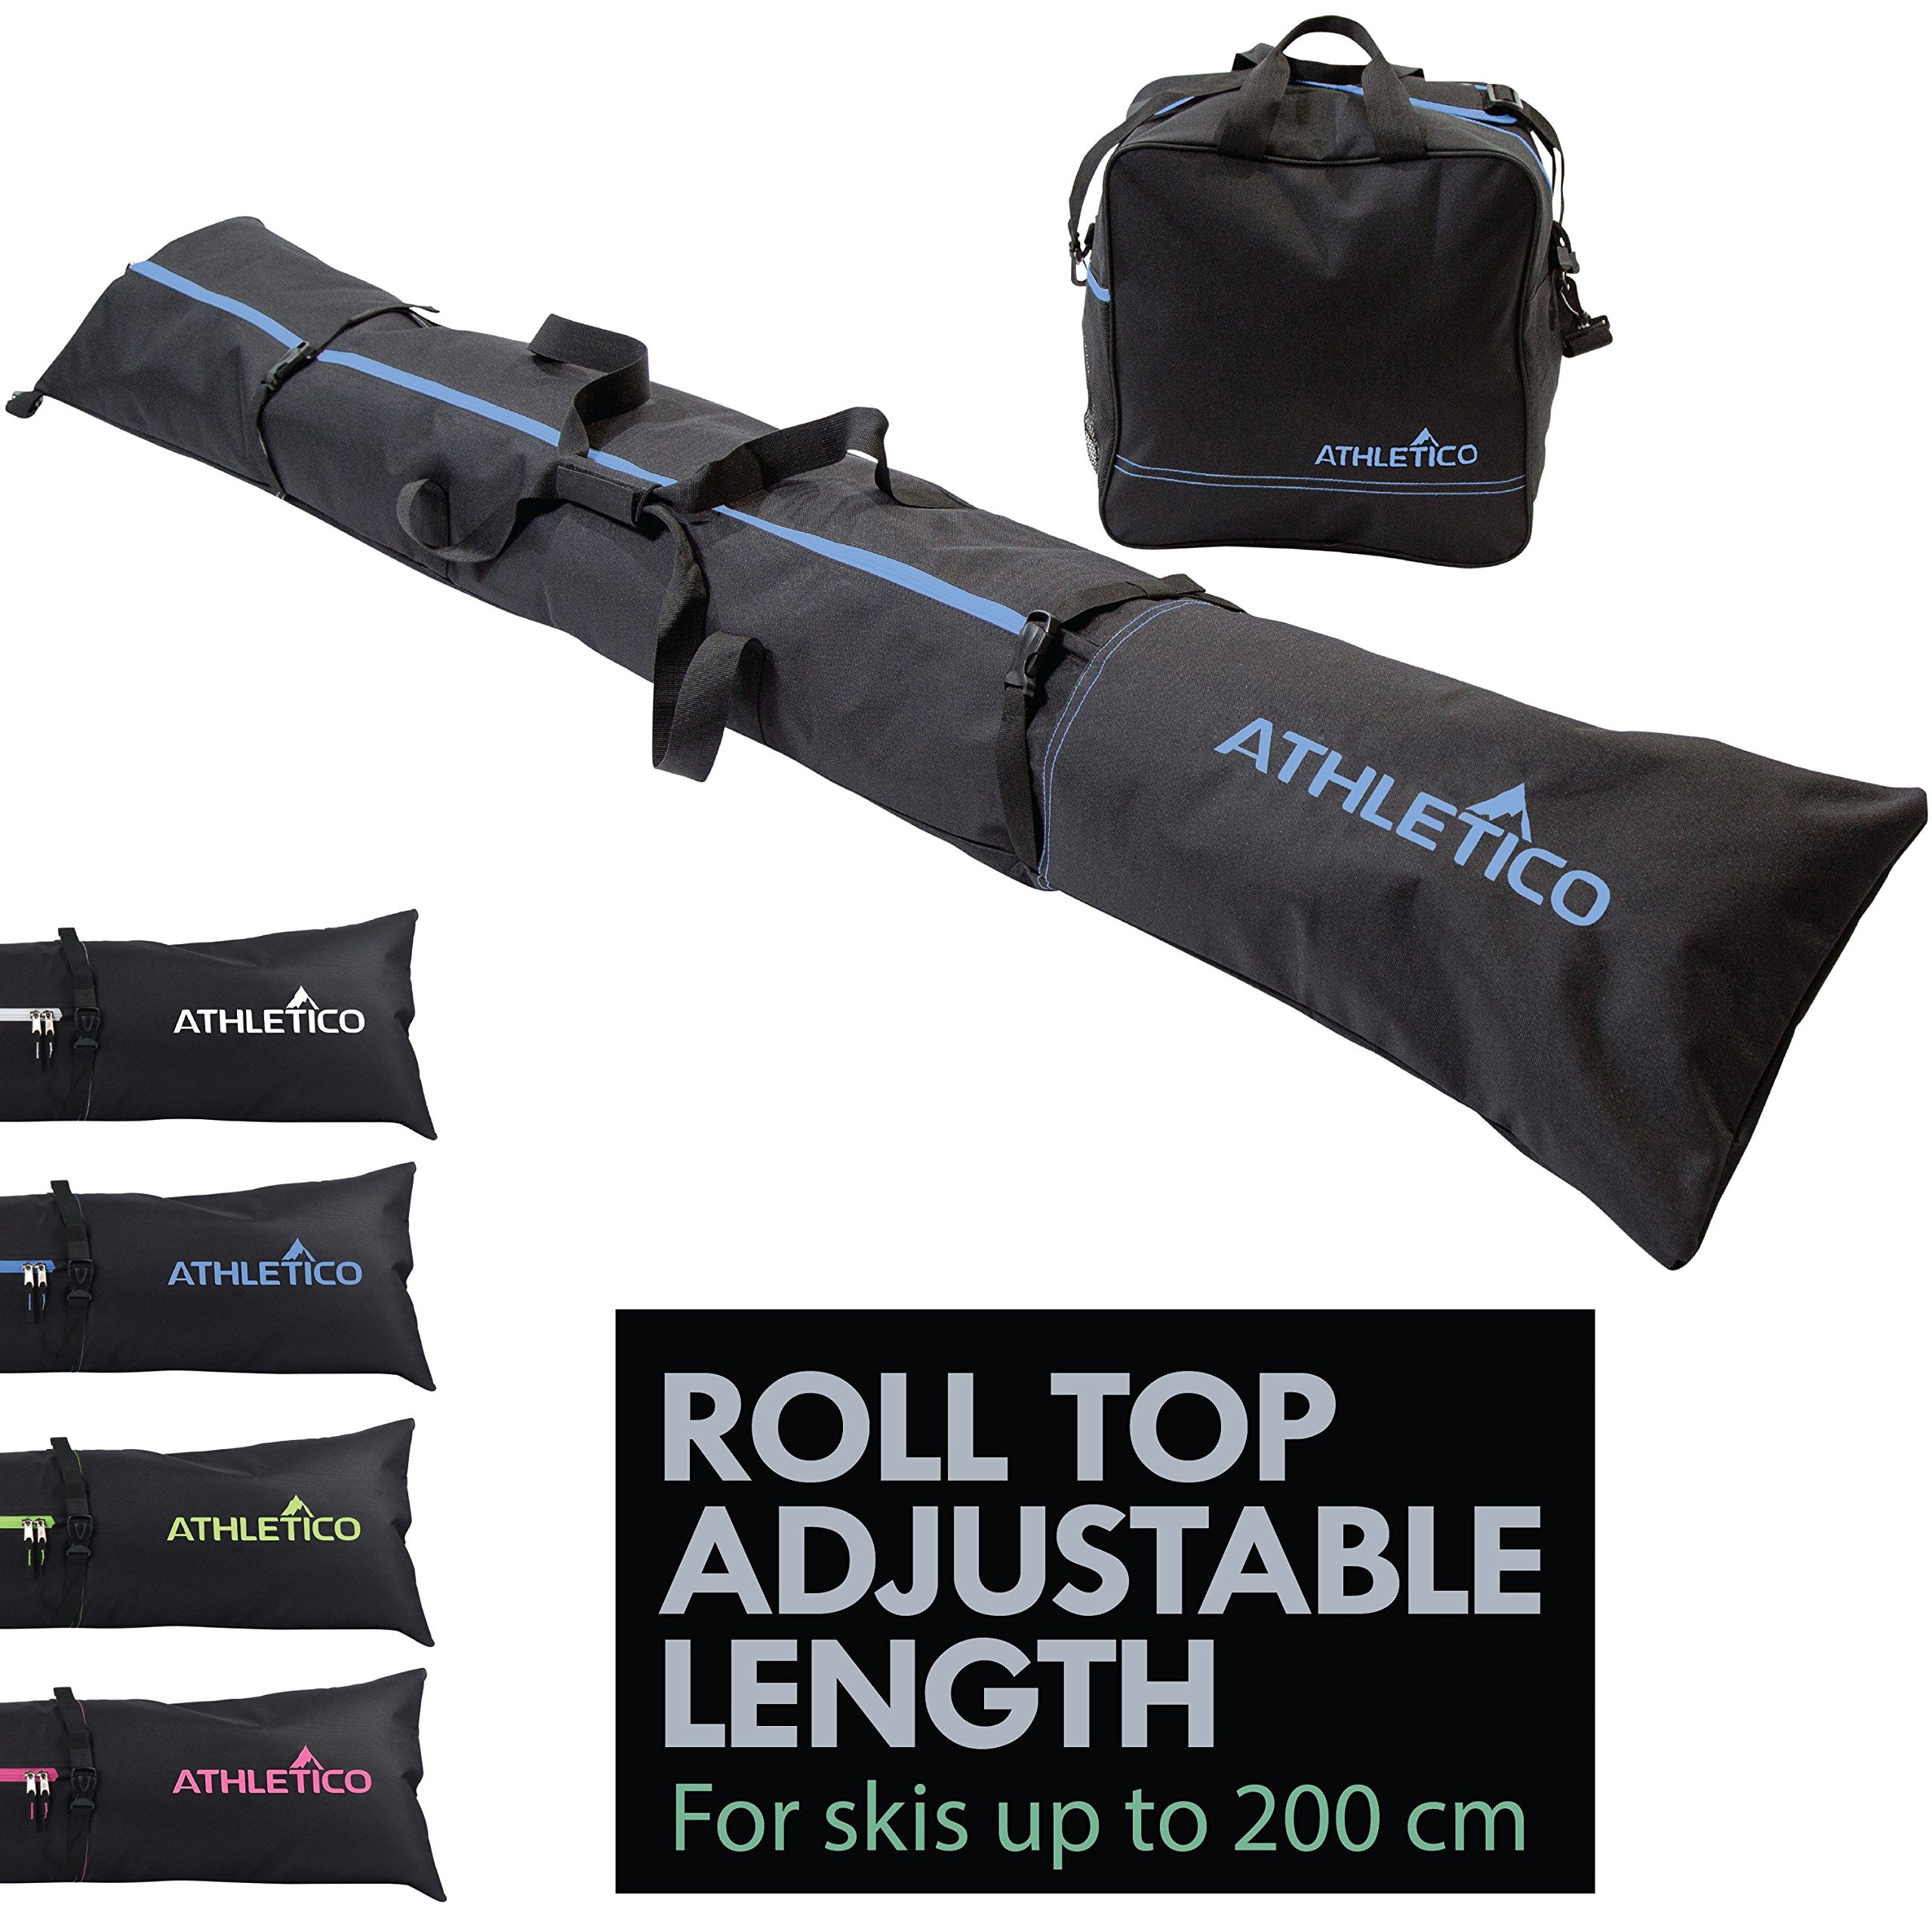 Athletico Ski Bag and Ski Boot Bag Combo - Ski Bags for Air Travel - Unpadded Snow Ski Bags Fit Skis Up to 200cm - For Men, Women, Adults, and Children  - Good